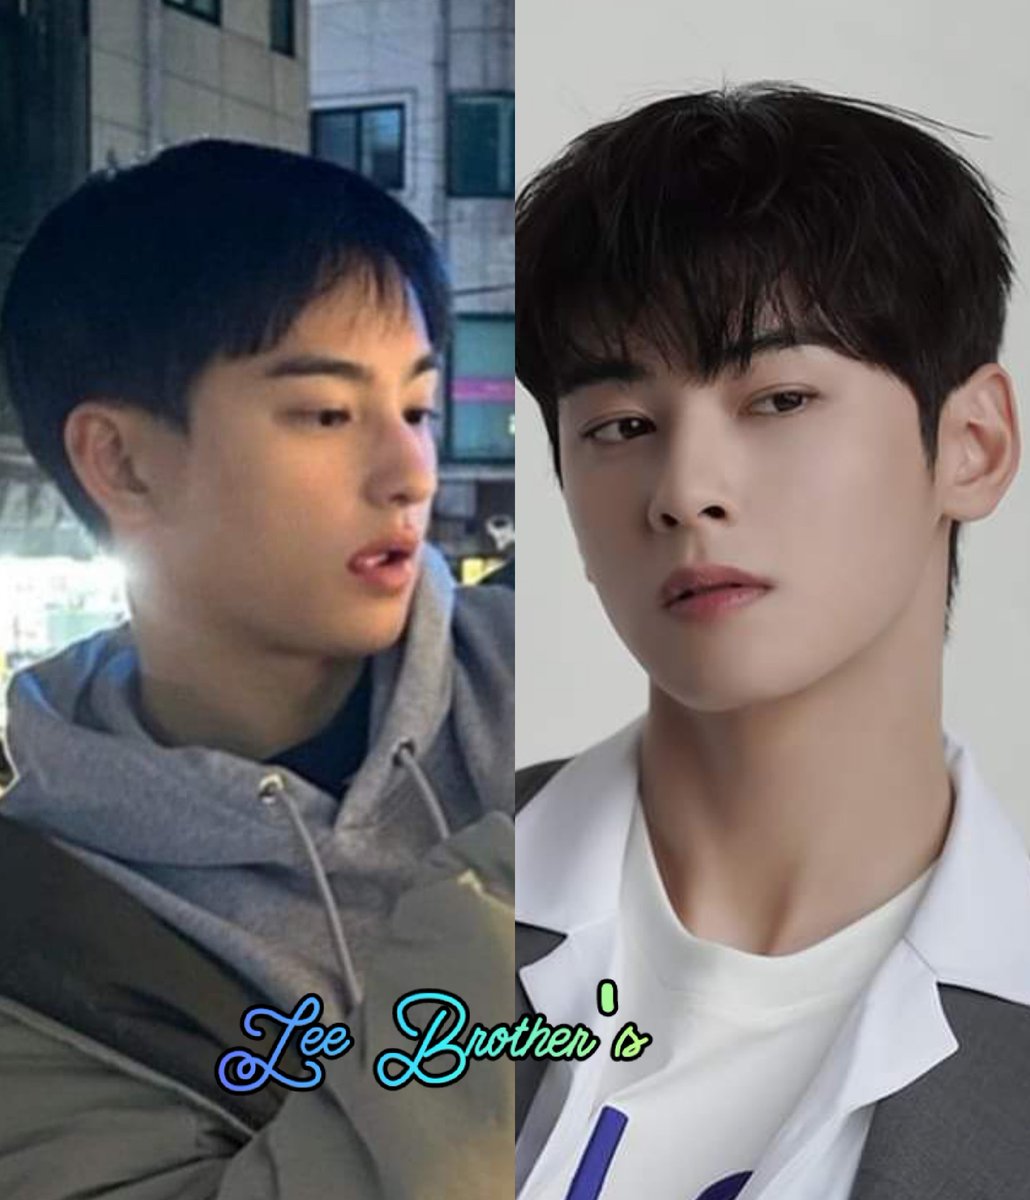 LEE BROTHER's!!!
 Why are you  so handsome? You are both handsome..Beauties are still natural without surgery since childhood☺️🥰🫶
#CHAEUNWOO #leedongmin #leedonghwa #leebrothers